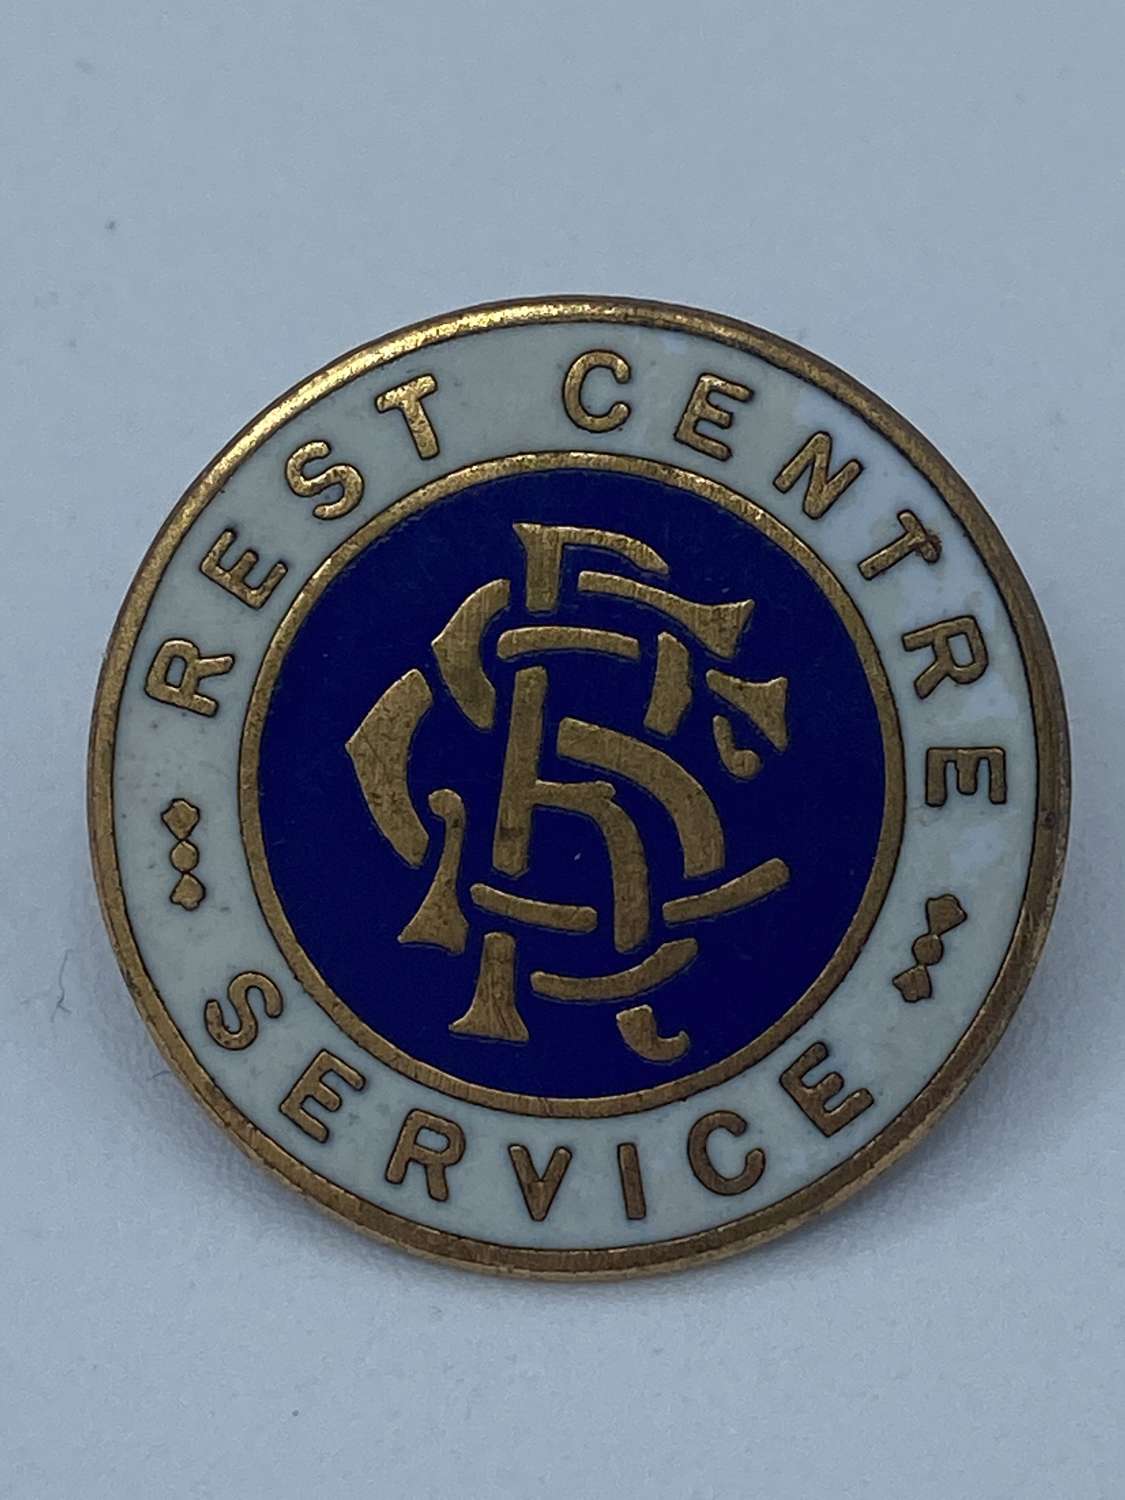 WW2 Home front Rest Centre Service Badge For Home Front Blitz Victims